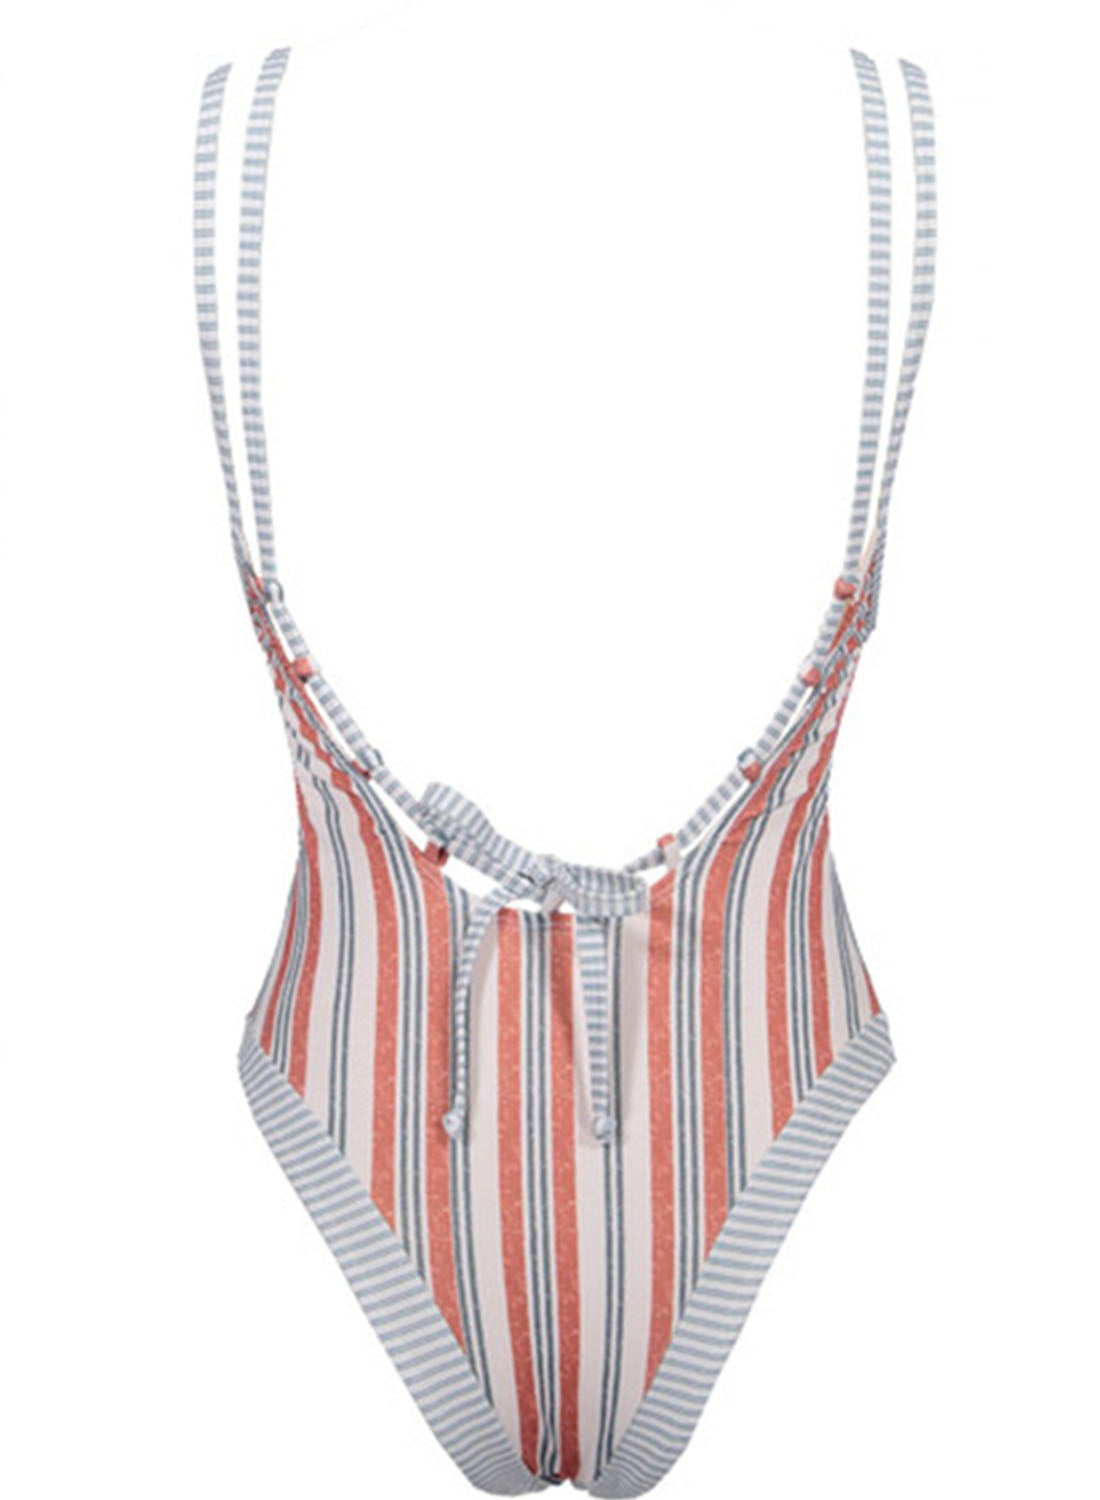 Stripe Women's Swimsuits Striped Strappy Backless One-piece Swimsuits LC441883-19